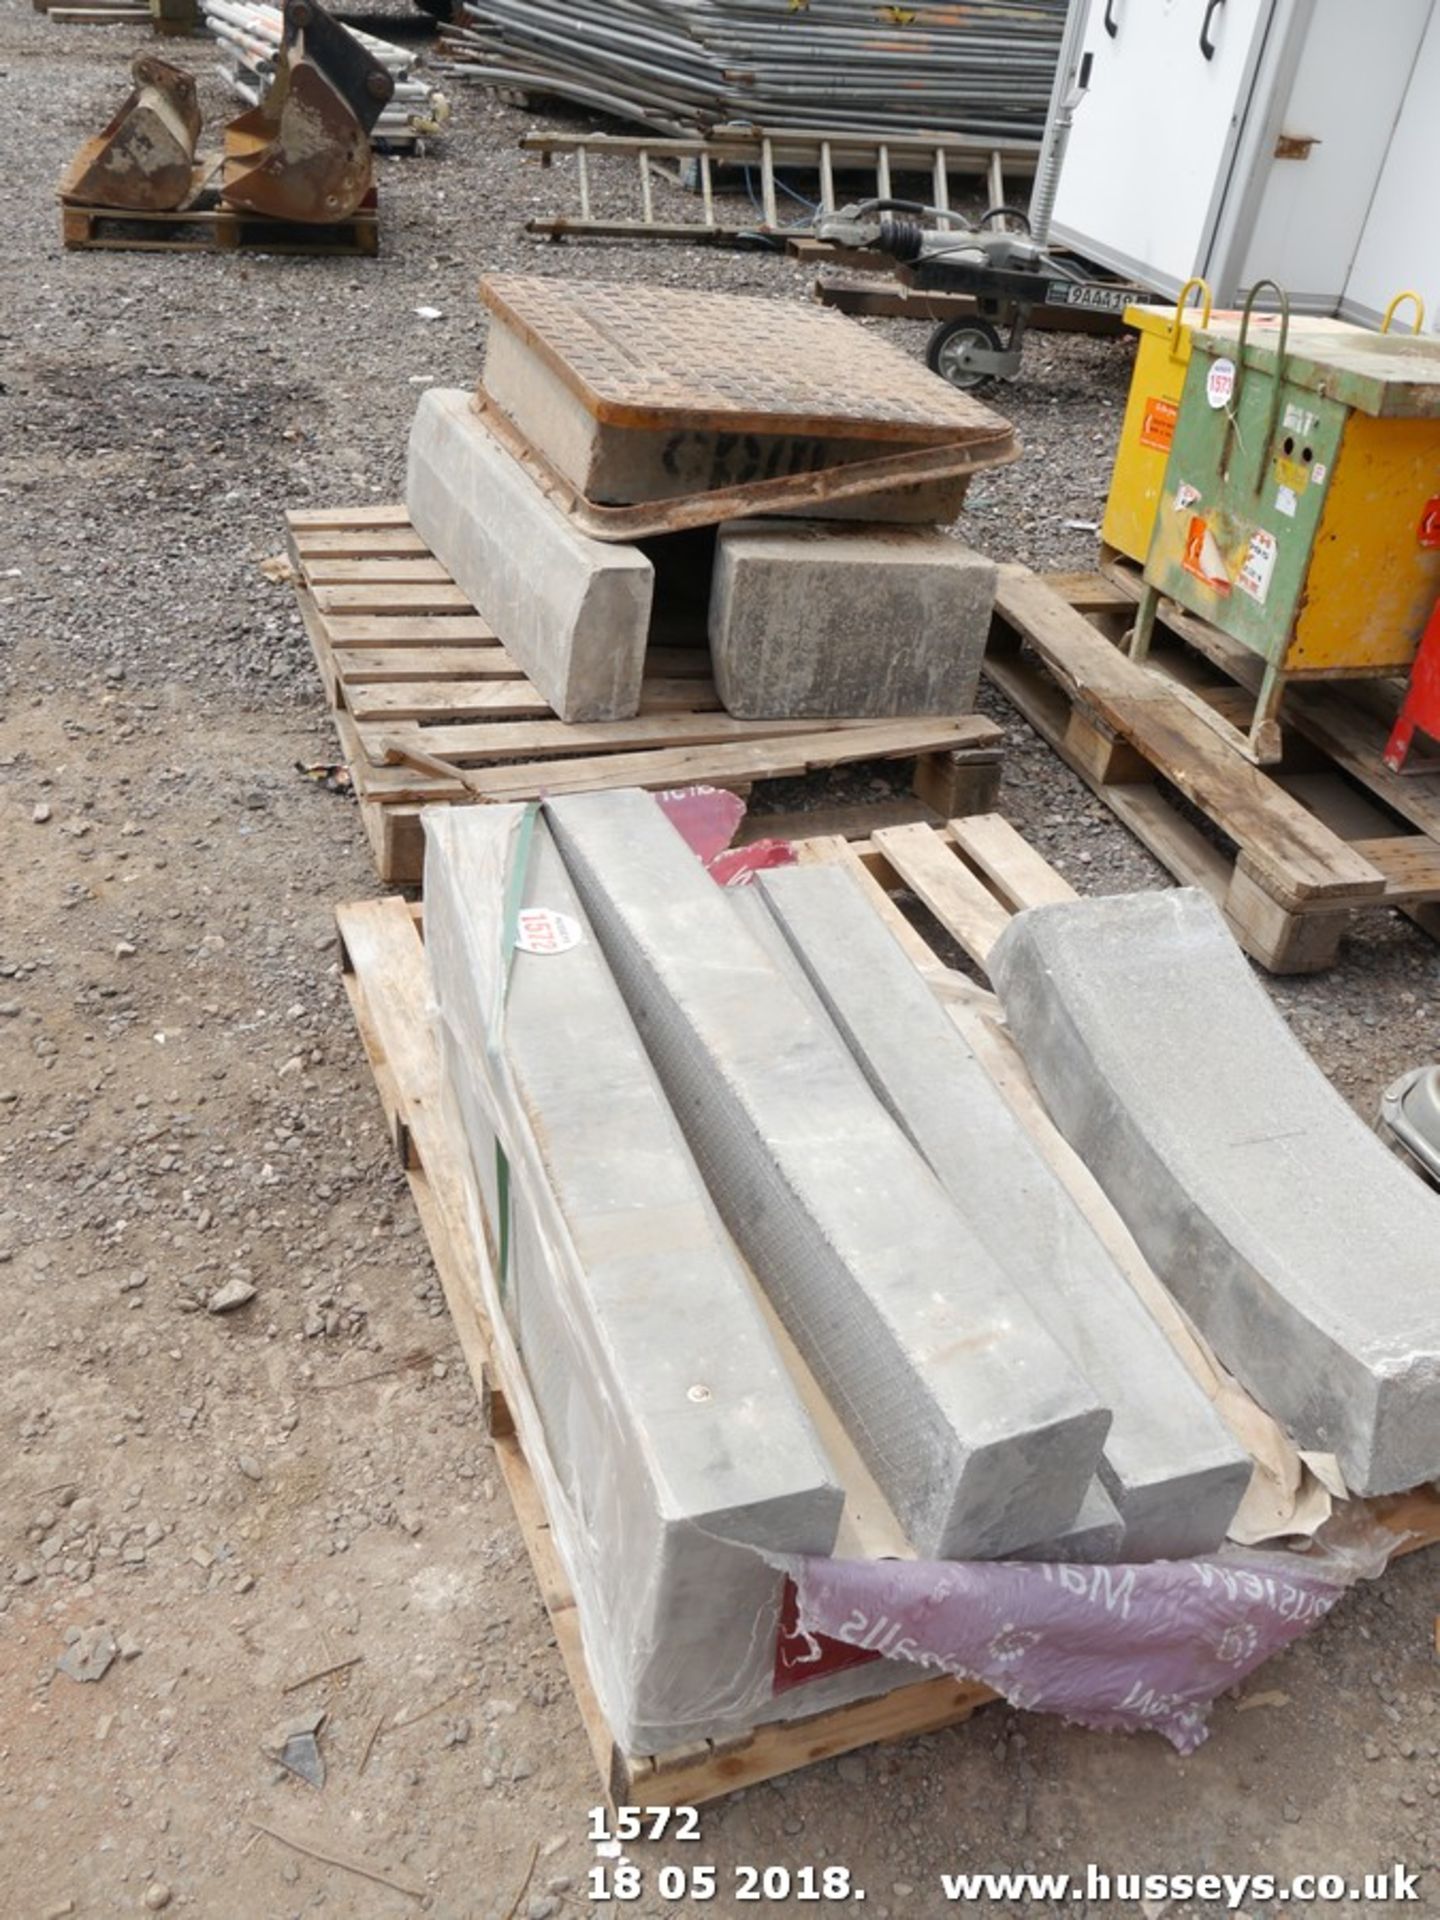 KERB STONES ON 2 PALLETS & MANHOLE COVER